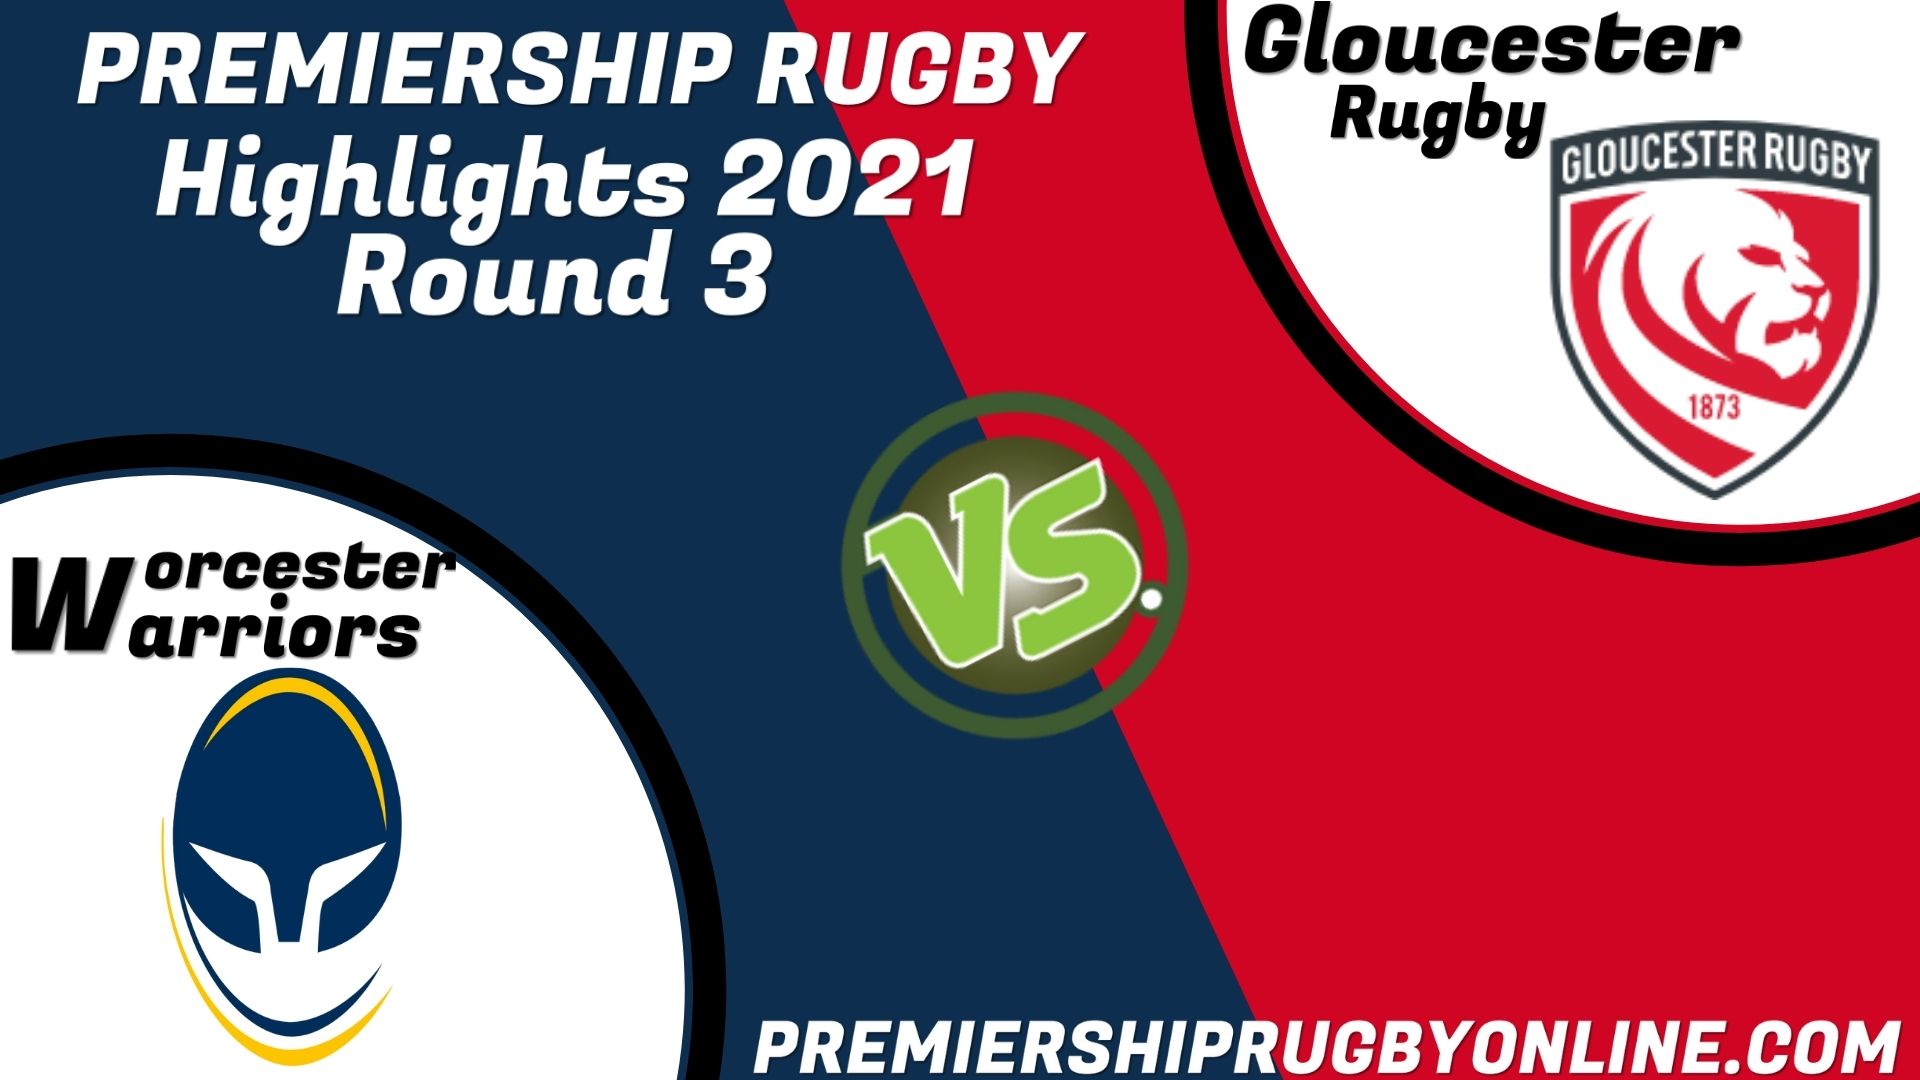 Worcester Warriors Vs Gloucester Rugby Highlights 2021 RD 3